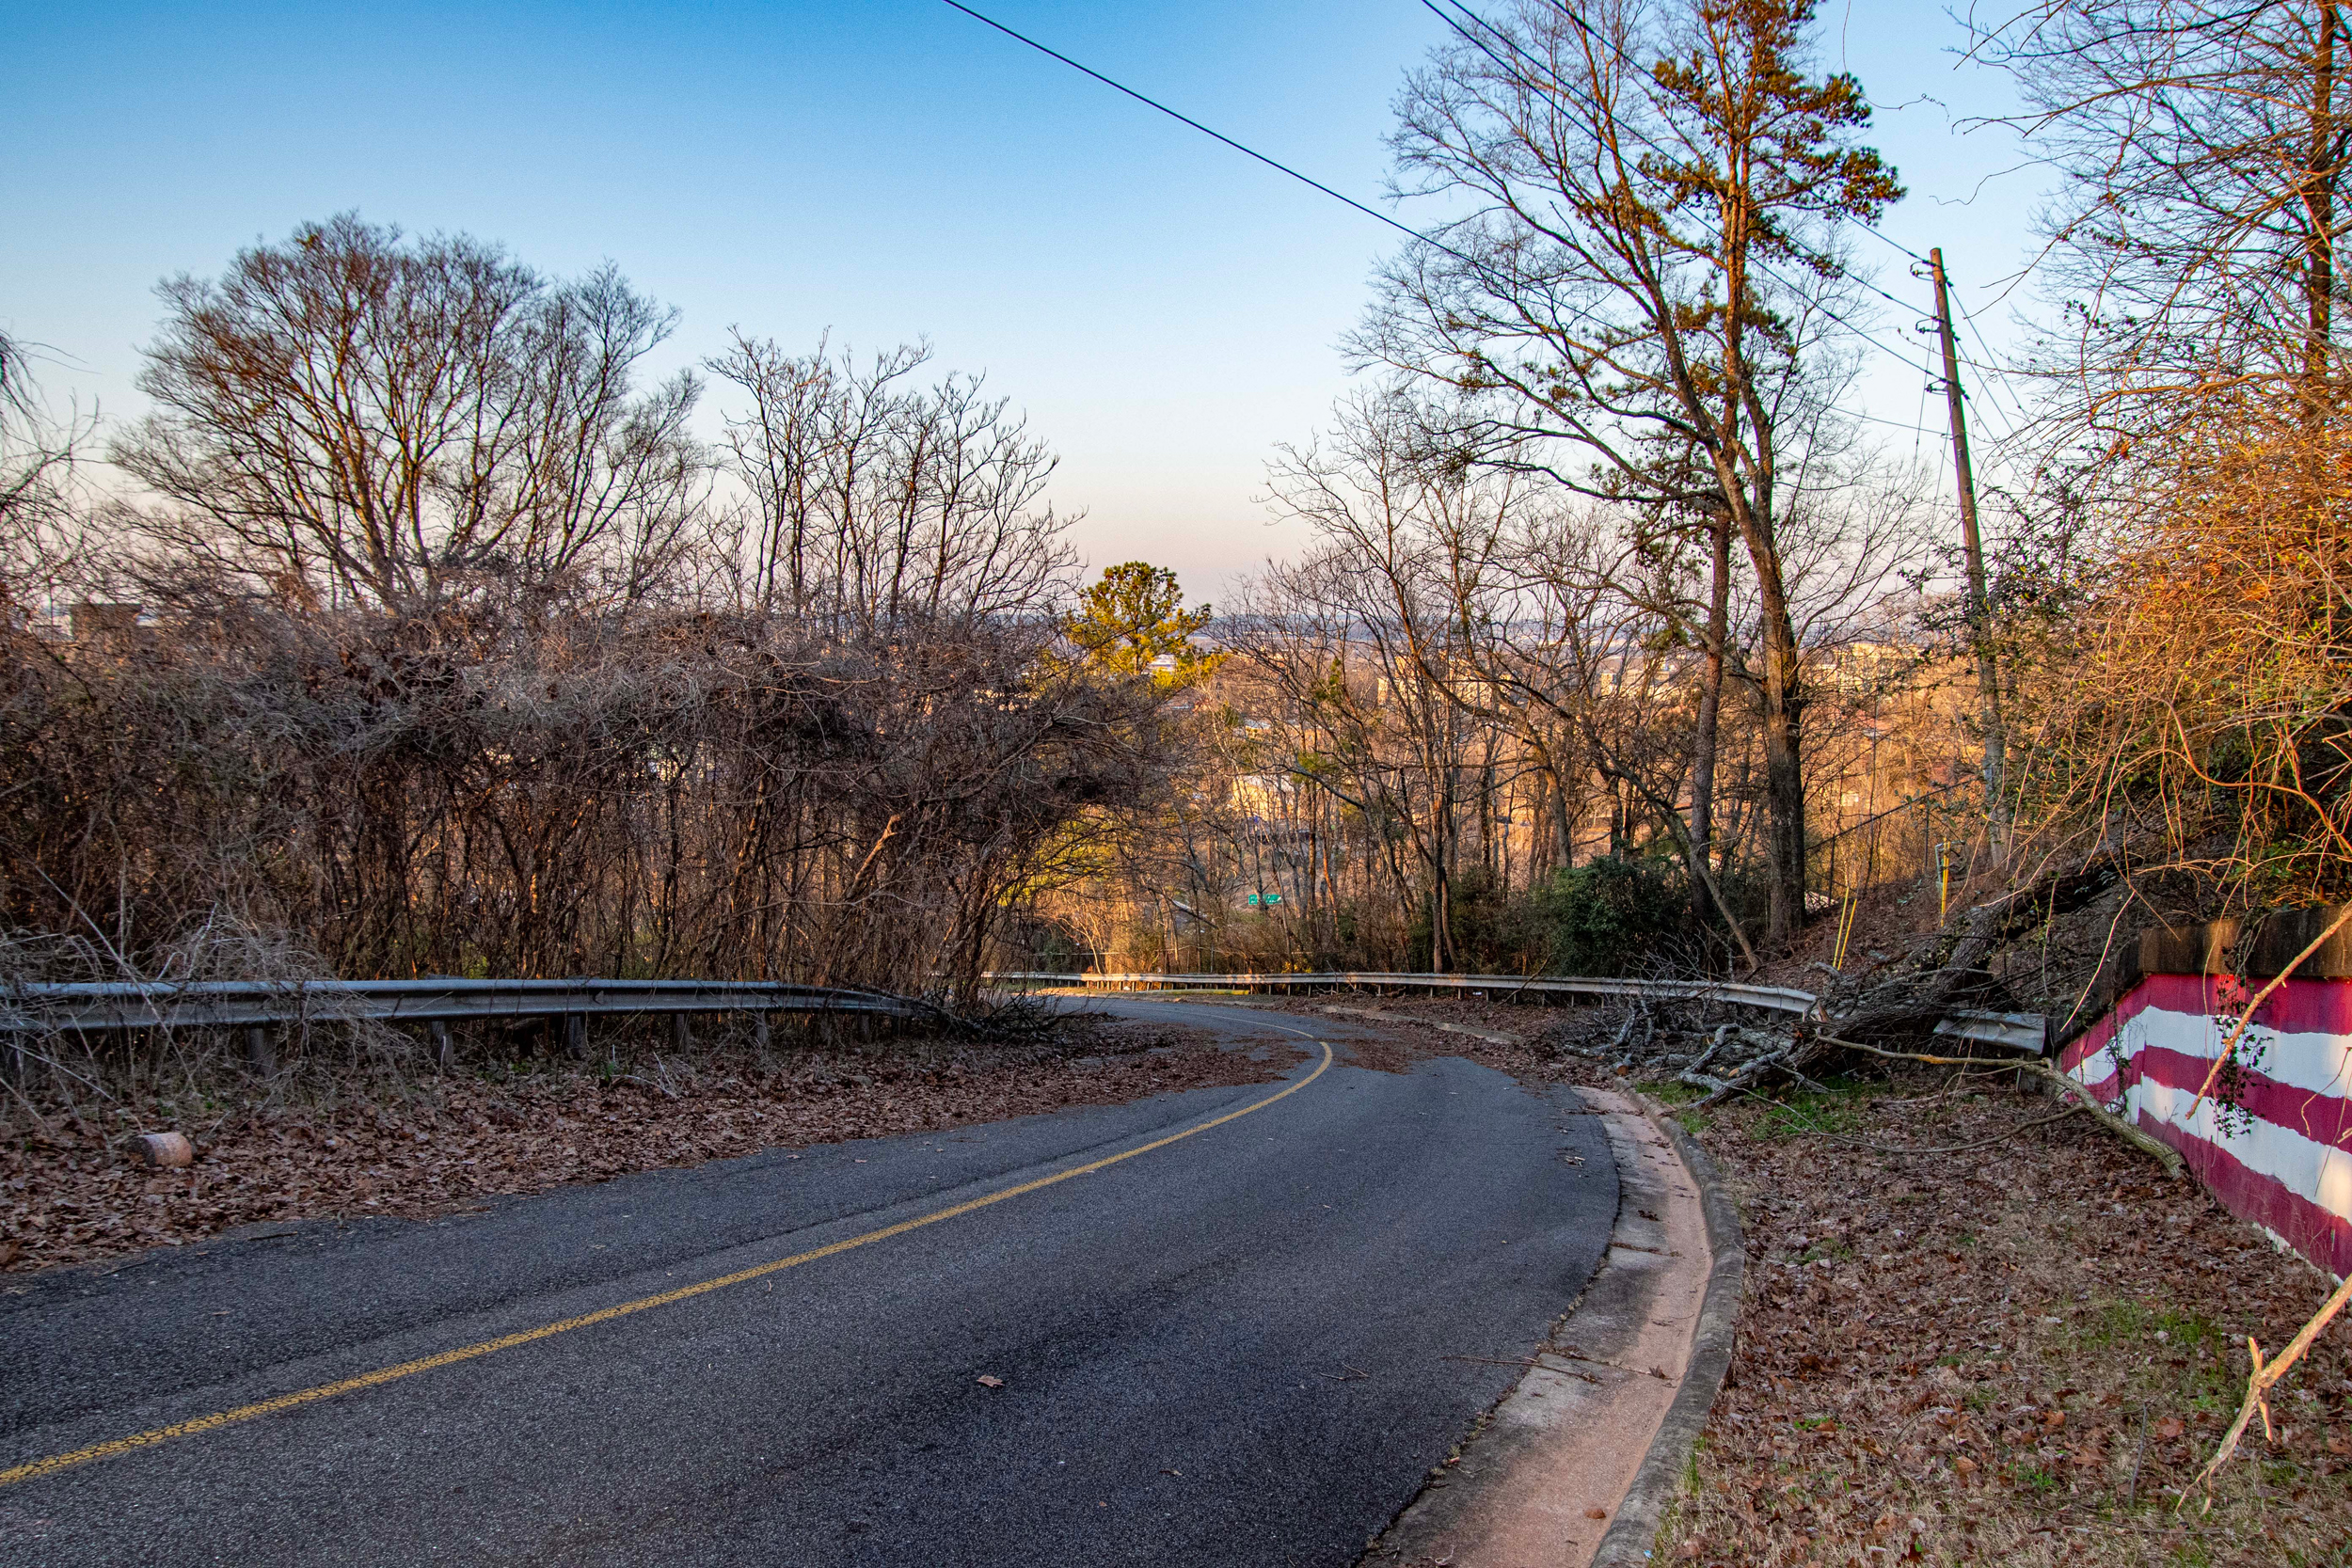 Birmingham's Woodcrest Road has been closed for over a year following concerns about slope settlement. The city said there is currently no timeline for its reopening. Credit: Lee Hedgepeth/Inside Climate News